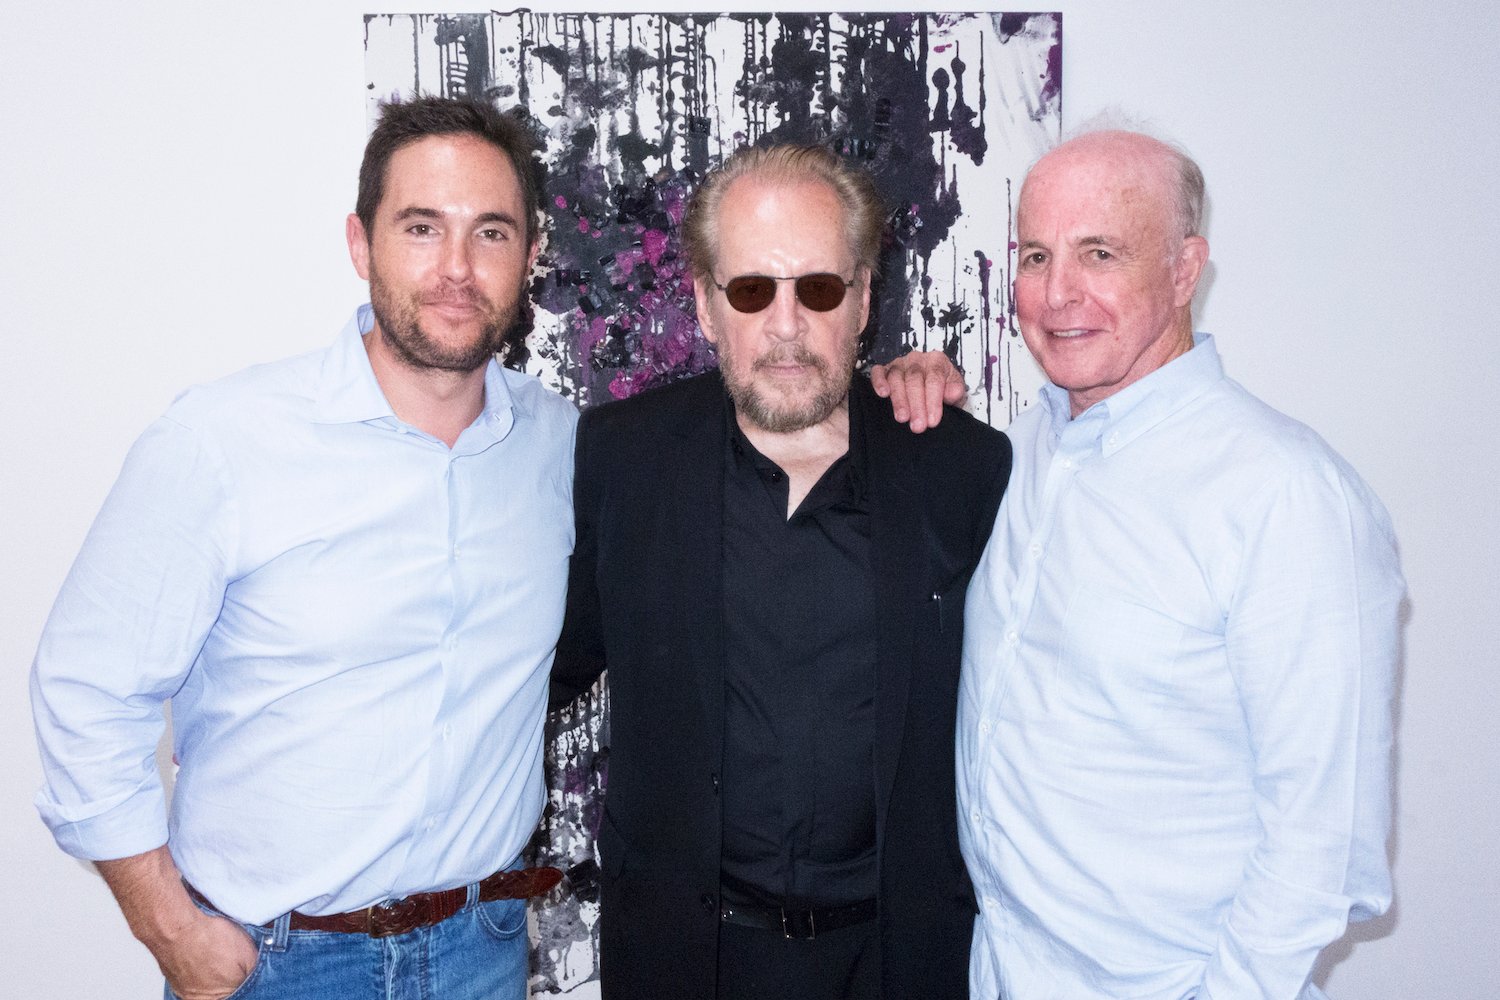 Josh Roth, Larry Clark, and Jim Berkus at the opening of Larry Clark's new show at UTA Artist Space in Los Angeles. Courtesy of Paige Silveria.